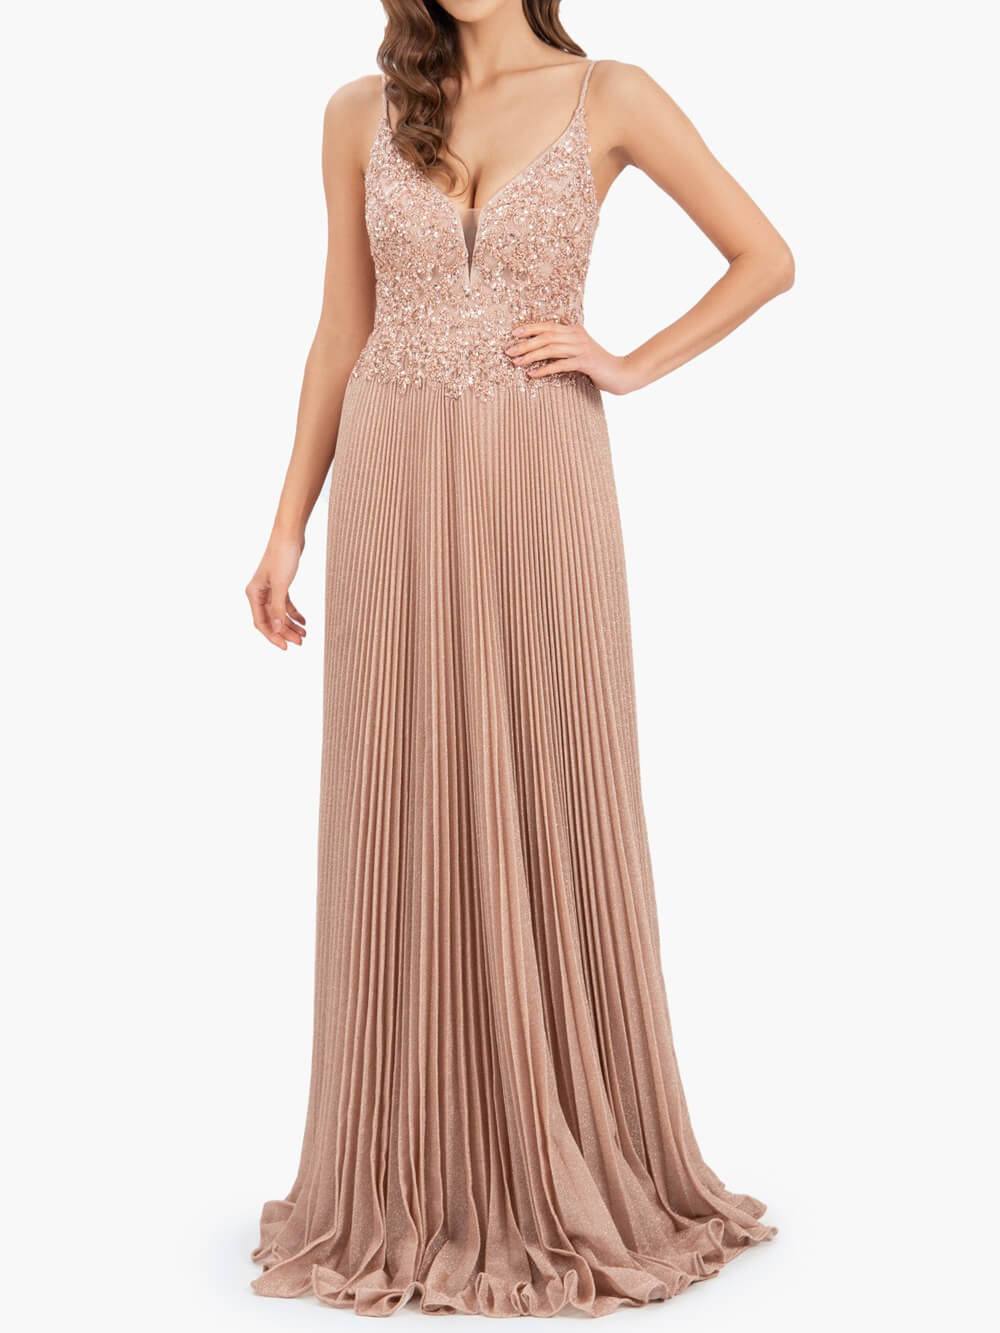 Elizabeth Rose Pink | A-line Floor Length Glitter Jersey Prom Dress with Appliques and Sequins